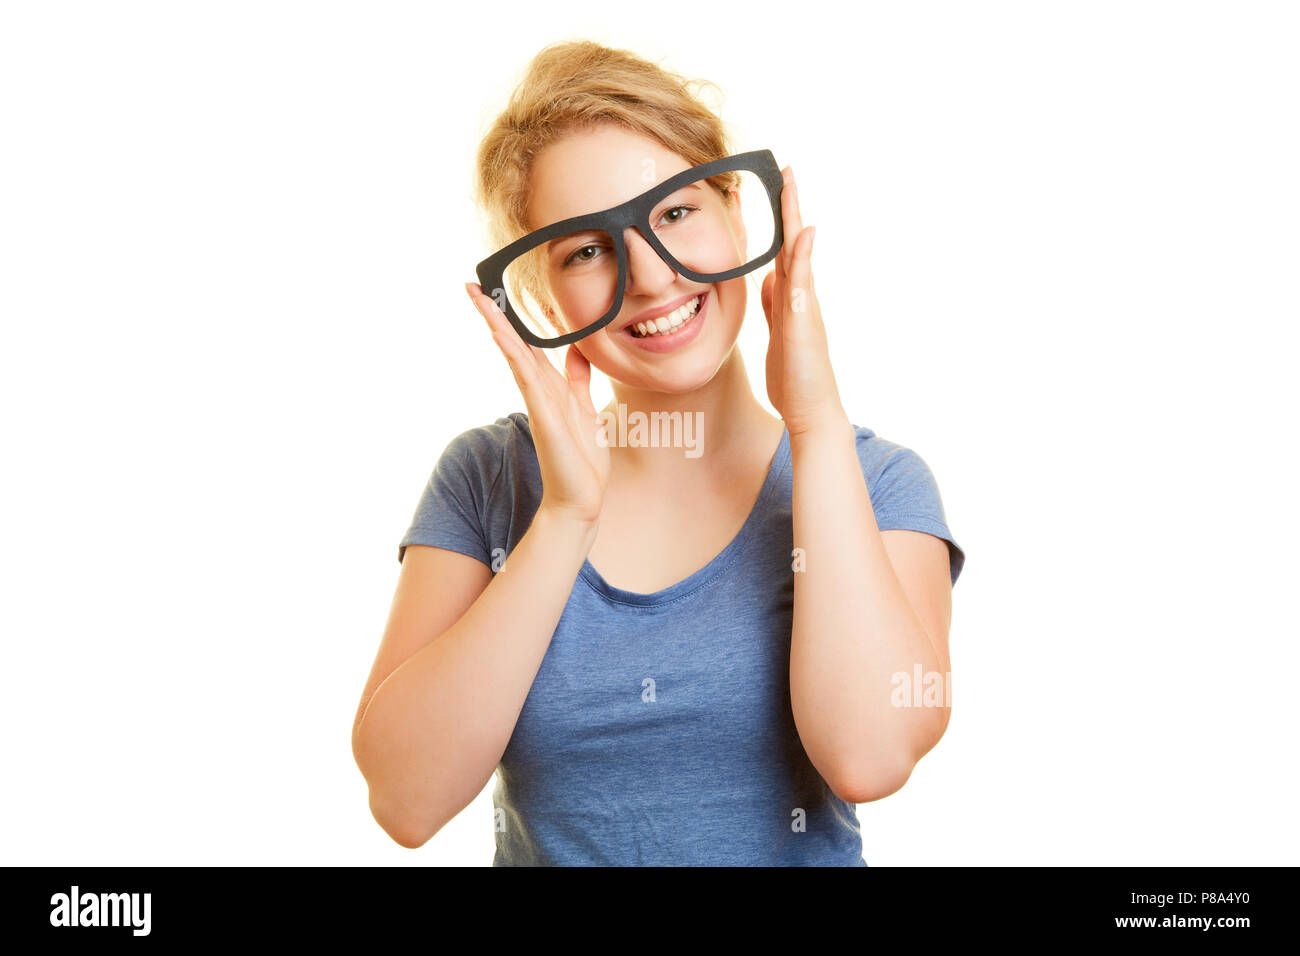 Smiling young woman is holding big glasses as a dummy in front of her eyes Stock Photo